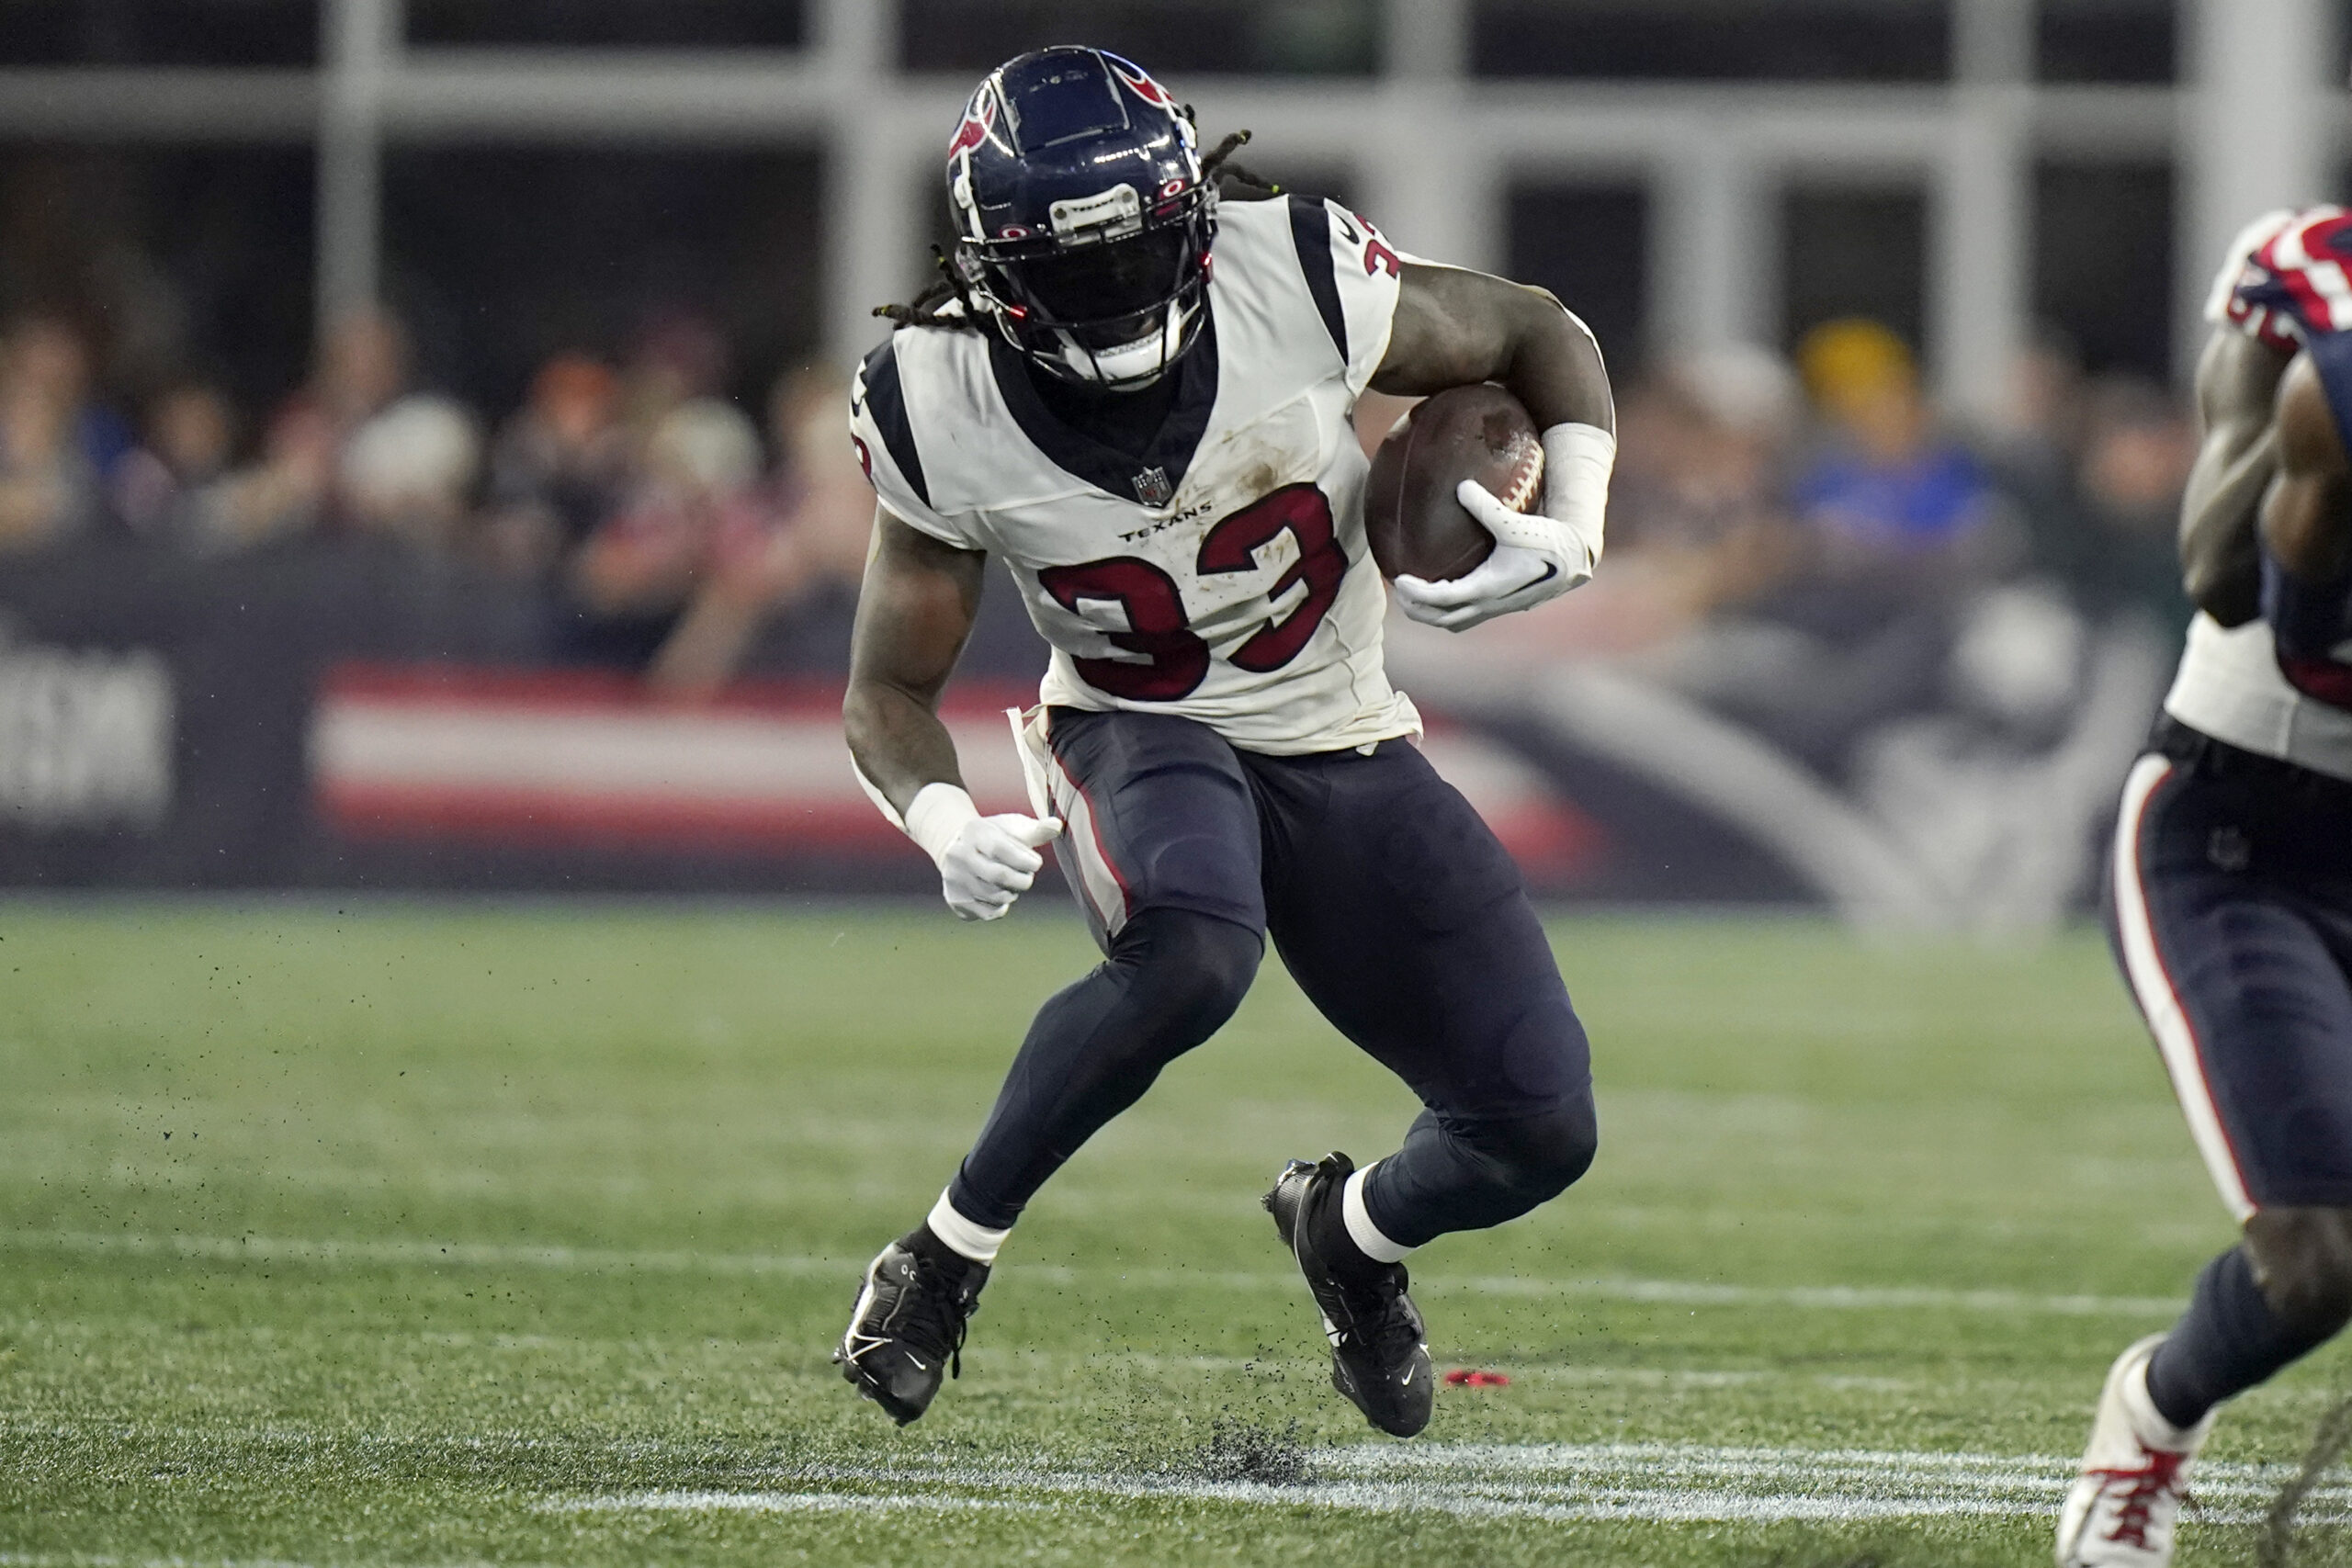 Houston Texans and former Badgers running back runs the ball during a preseason game